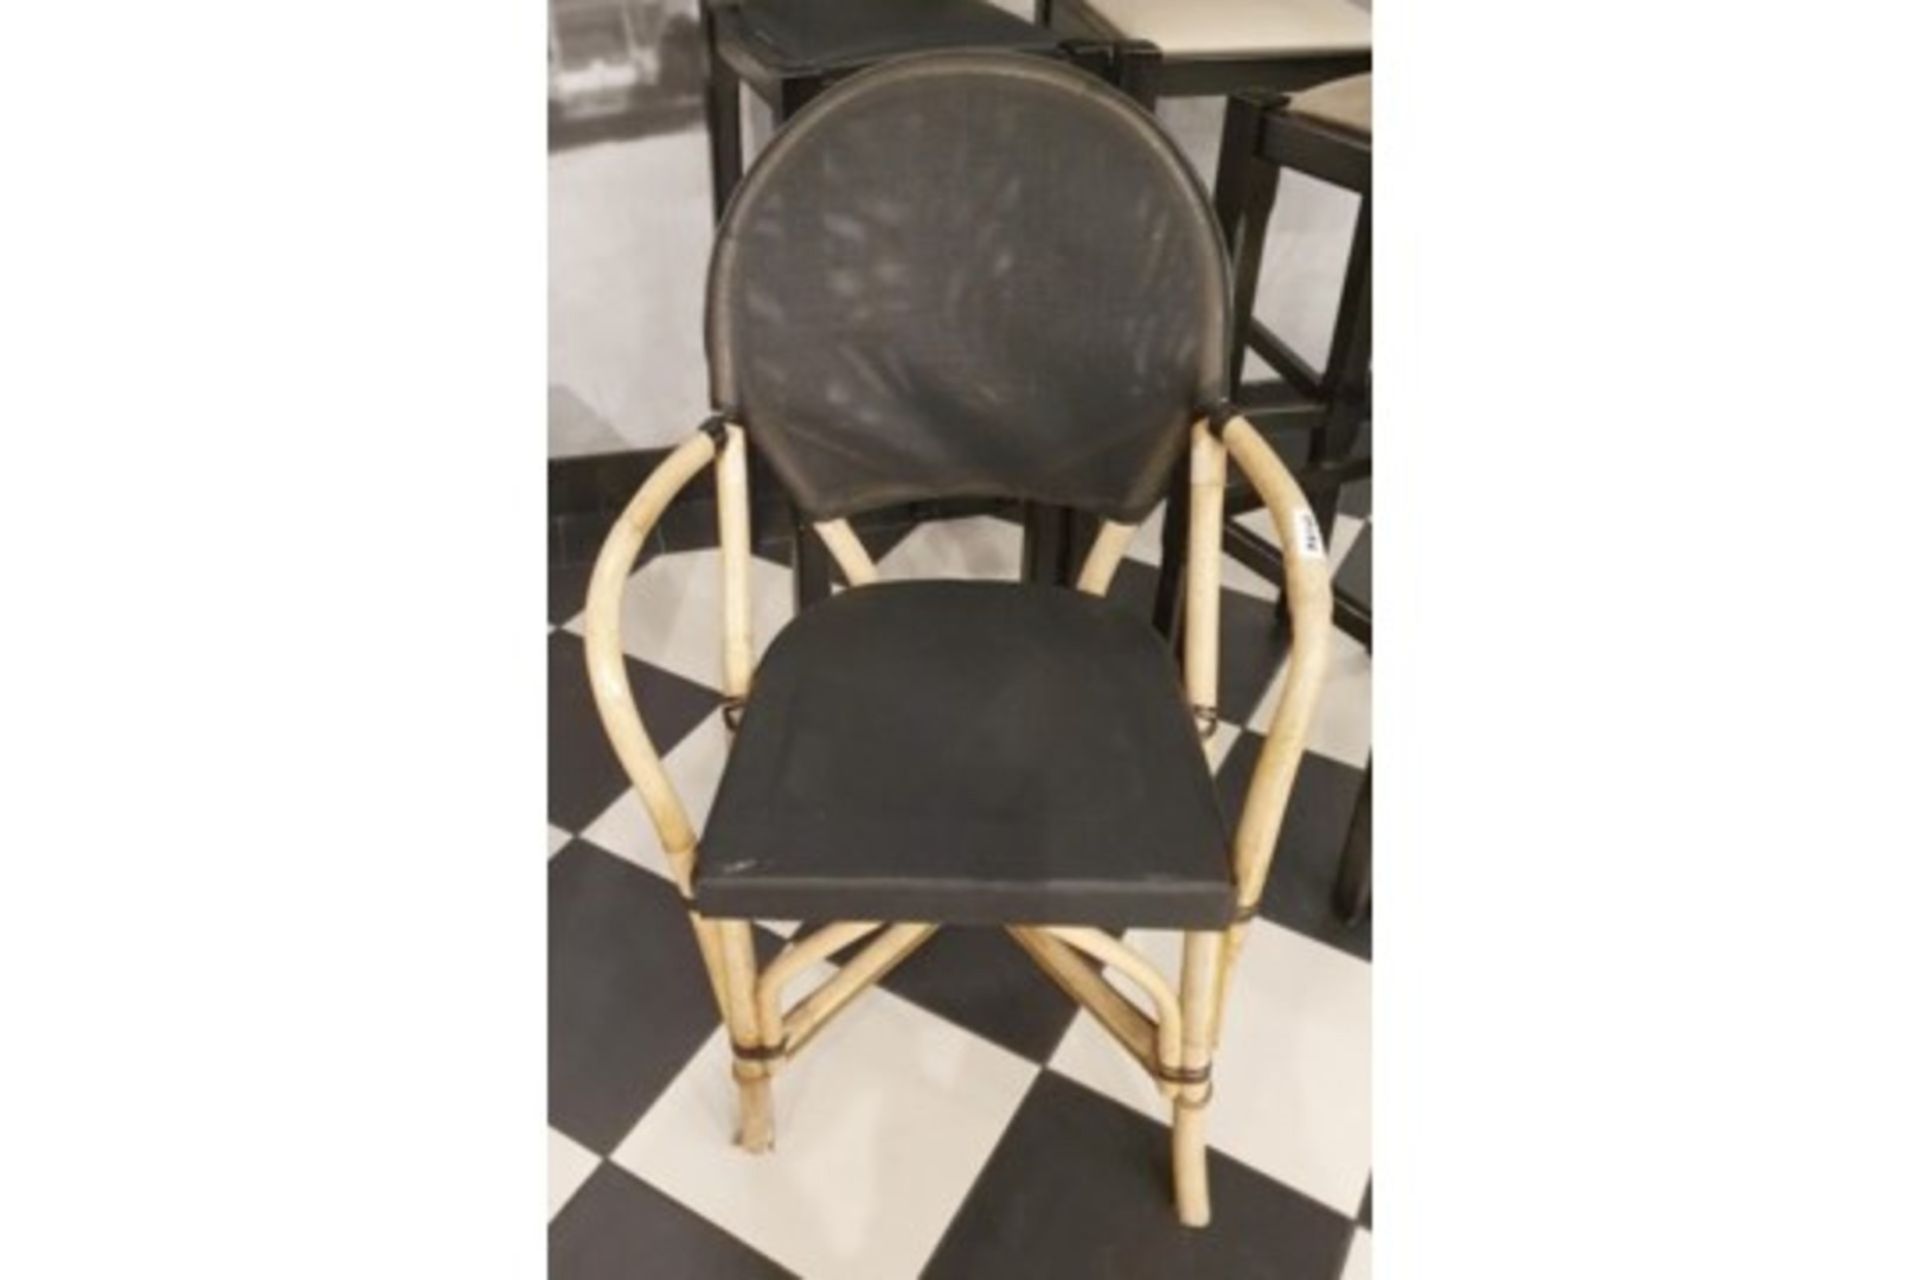 2 x Bamboo Studio Chair With Black Seat and Back Rest - Features the Name 'PAUL' Printed on the Back